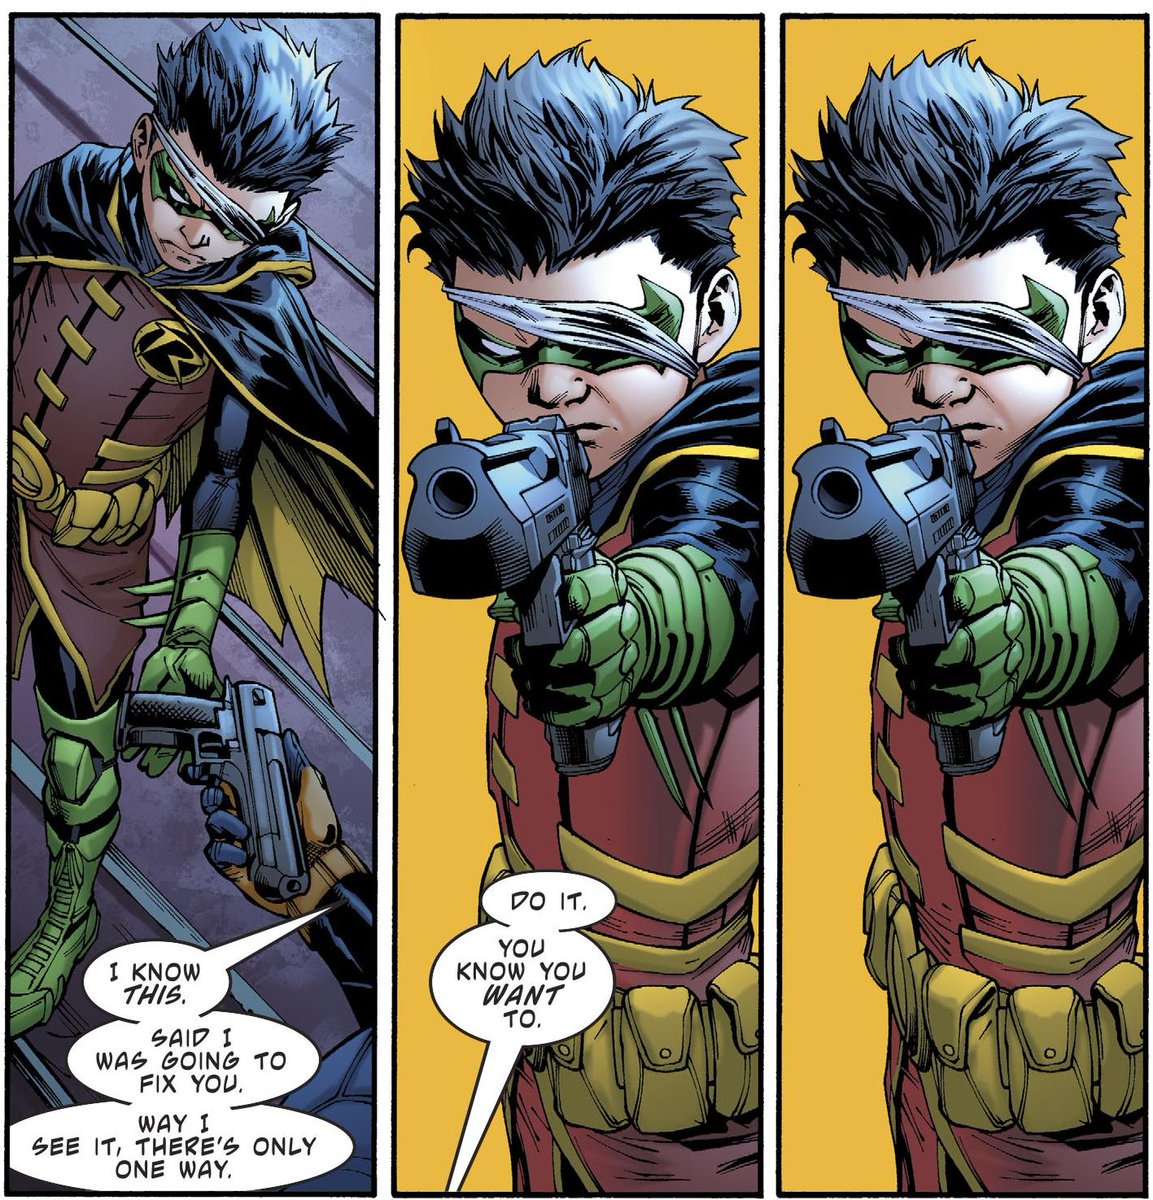 With that said, Deathstroke hands Damian his gun and Damian points it at Deathstroke.But before I continue, let's do a quick recap of how Emiko plays into all this